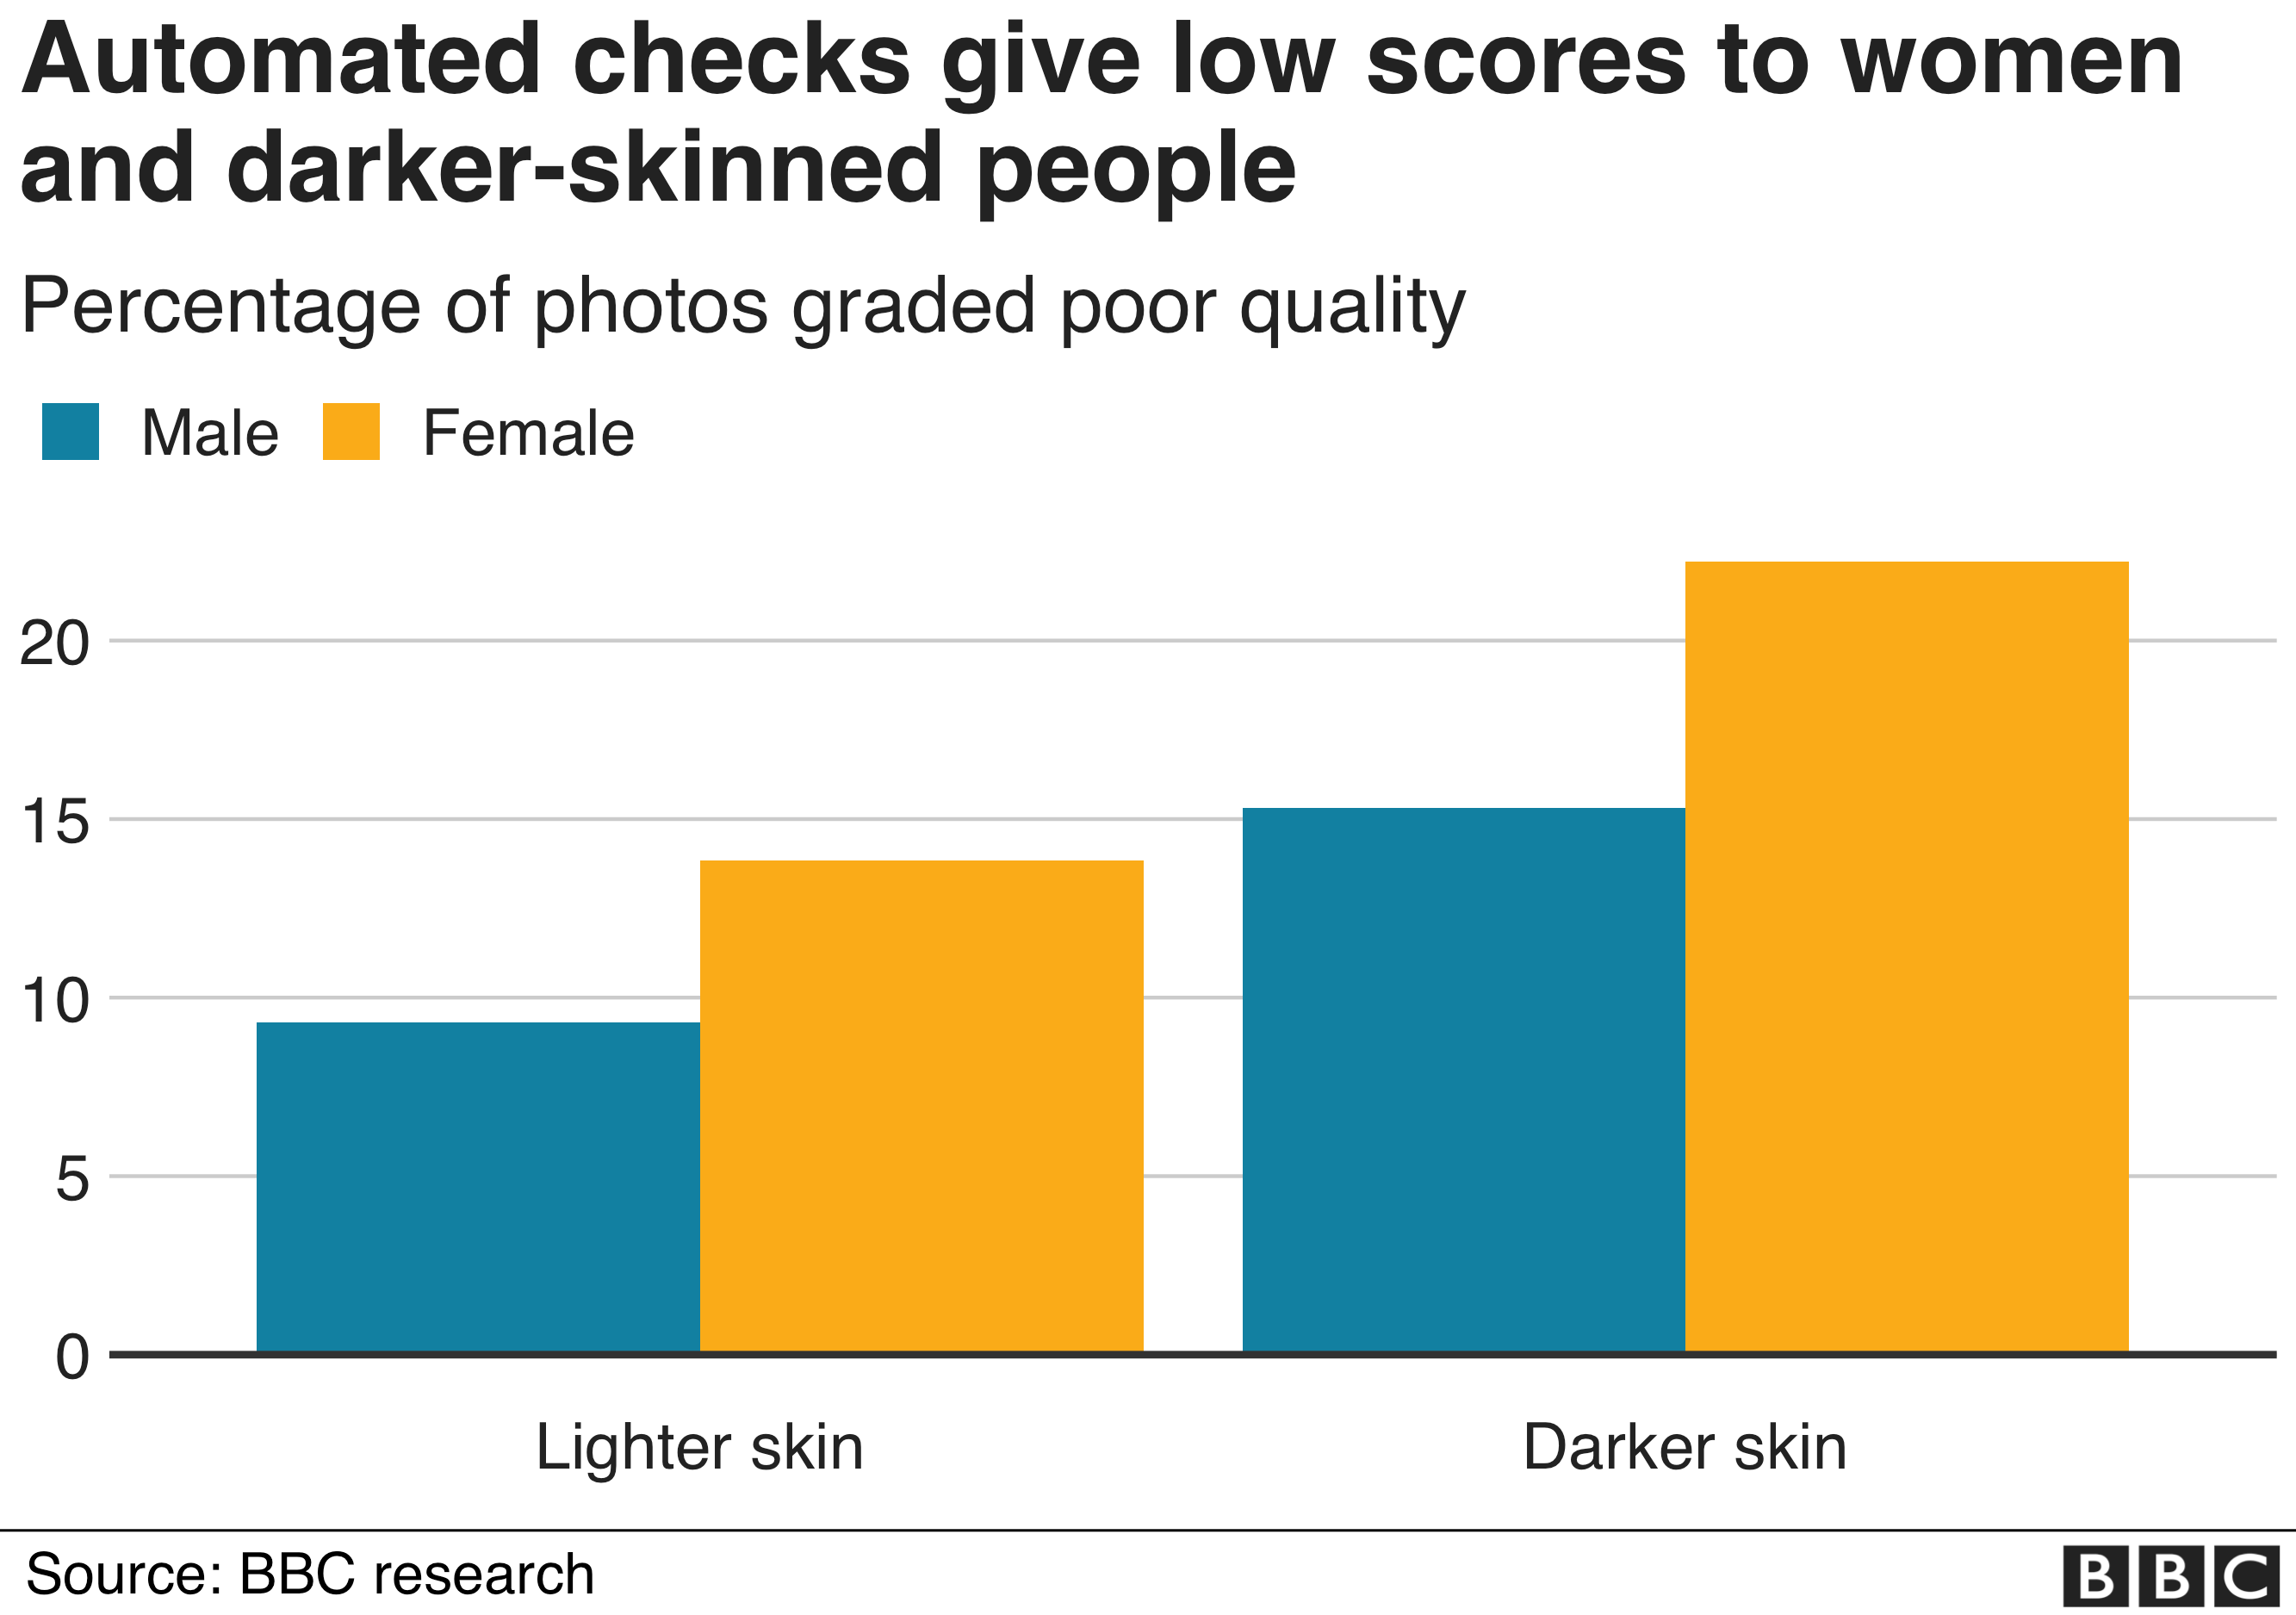 A chart showing that photos of women and darker skinned people are more likely to be given poor quality scores